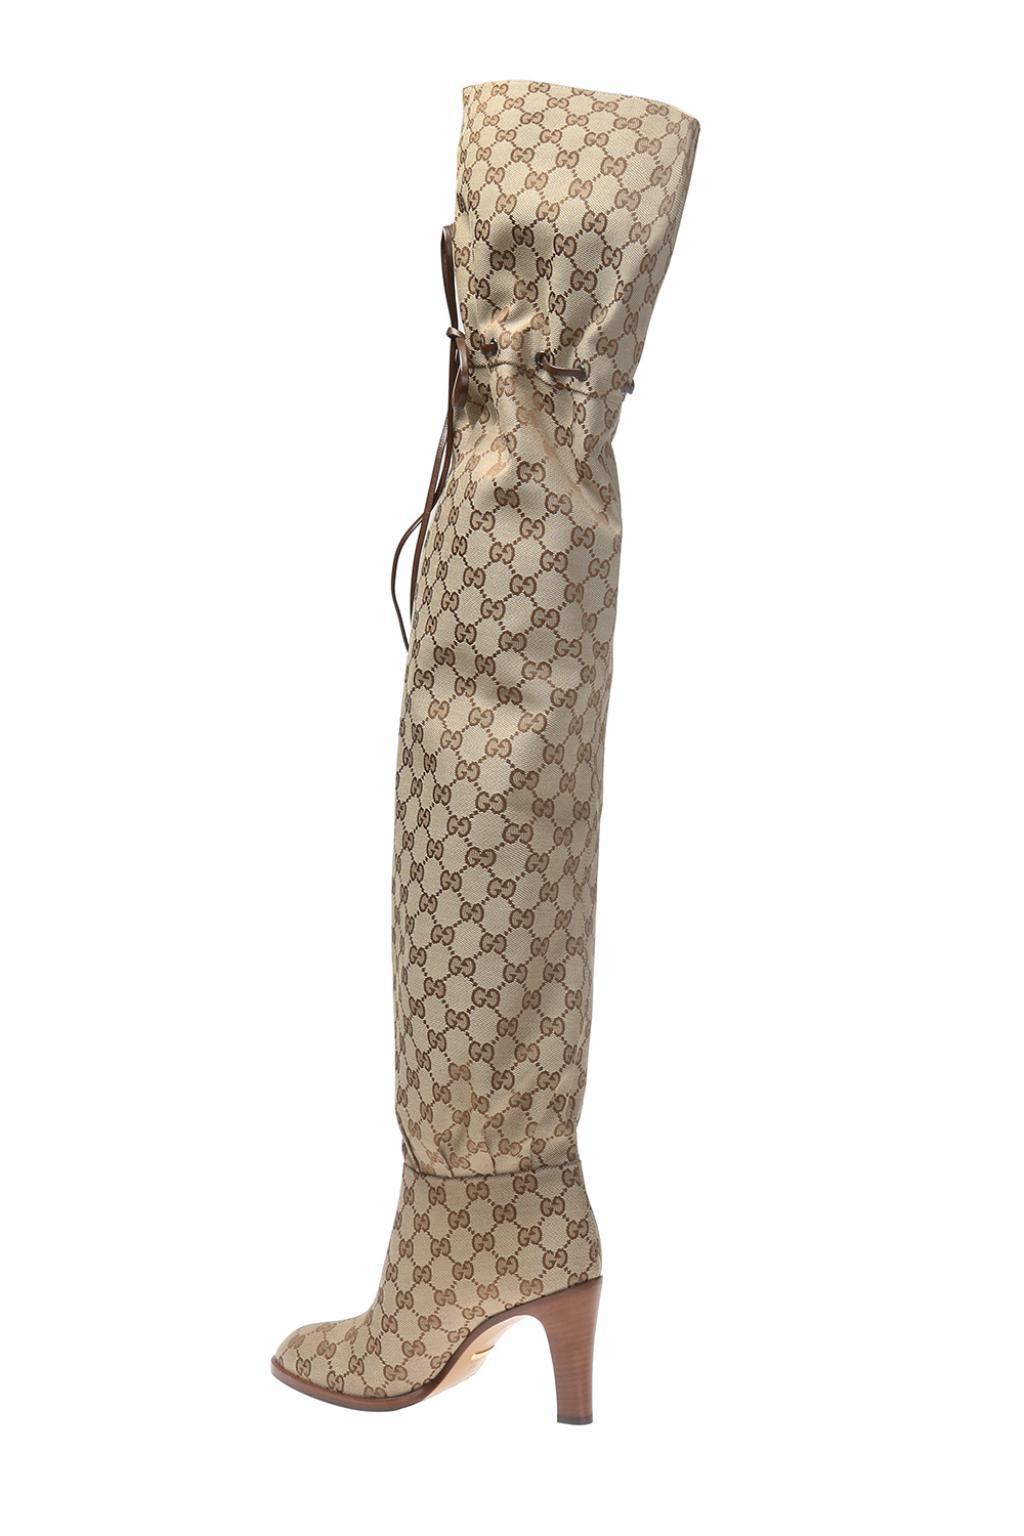 Gucci Leather Heeled Thigh-high Boots in Natural - Lyst